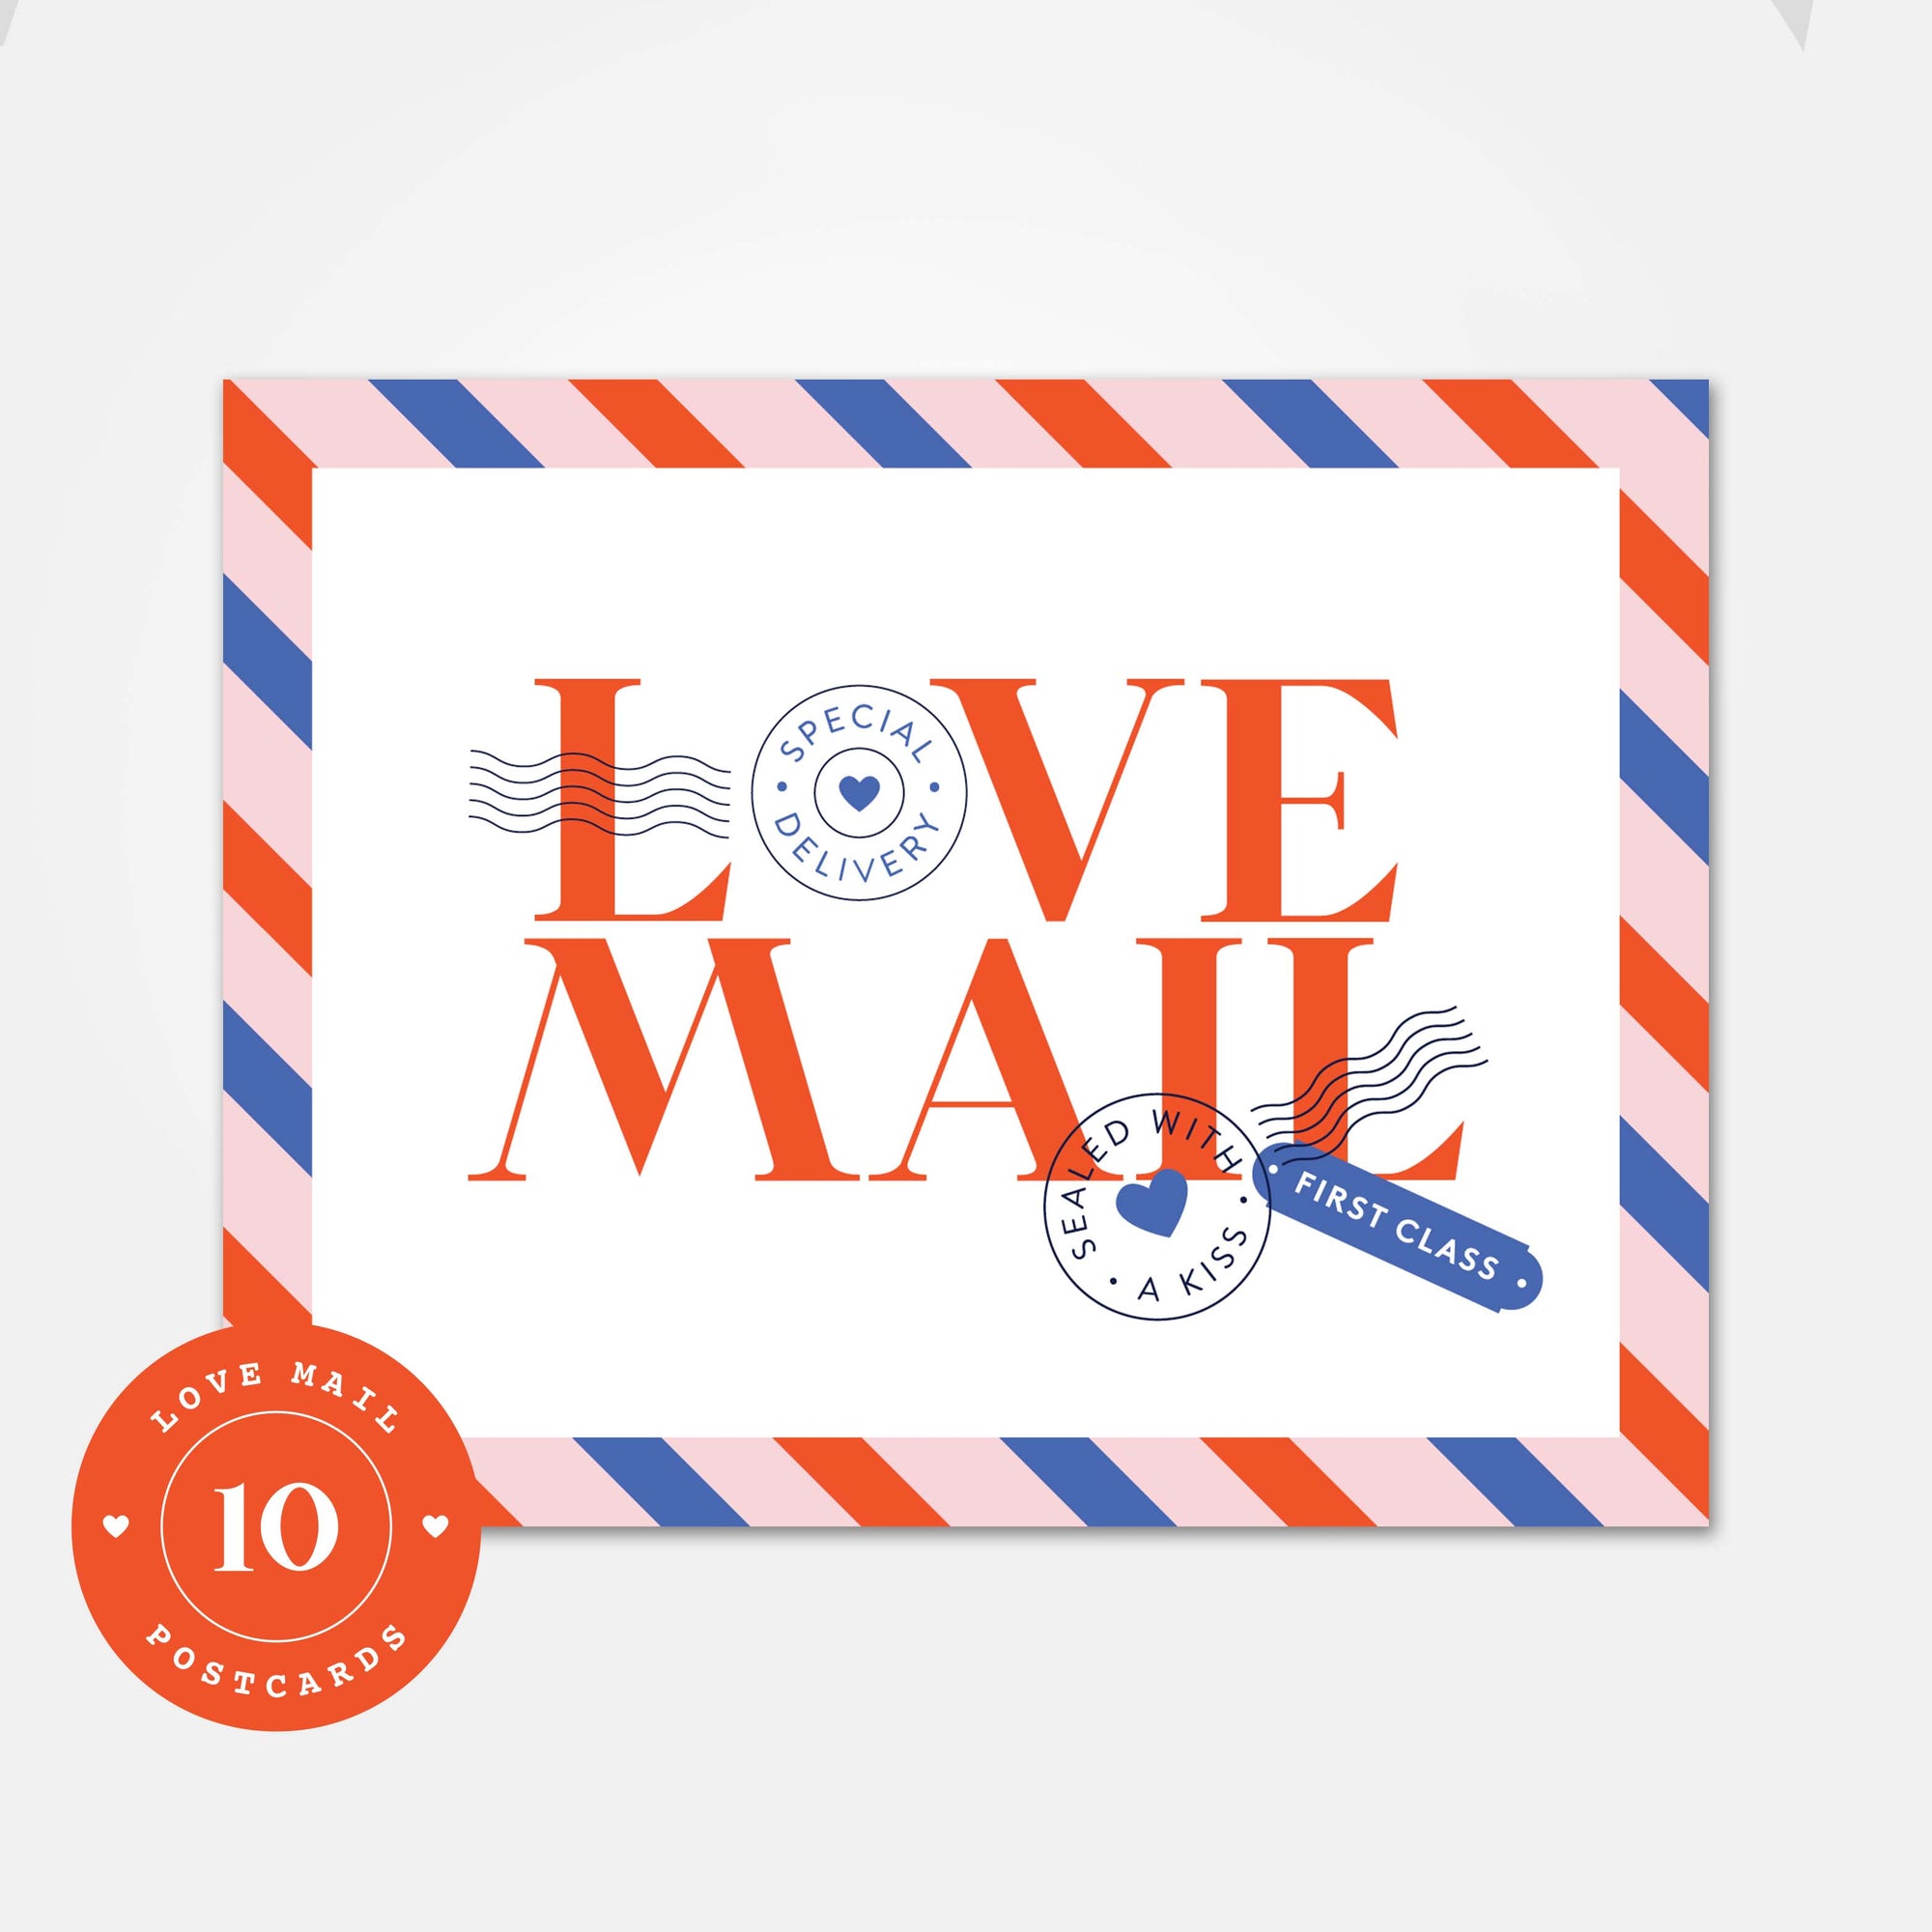 Love Mail - A2 Boxed Set of 10 Valentine's Day Postcards